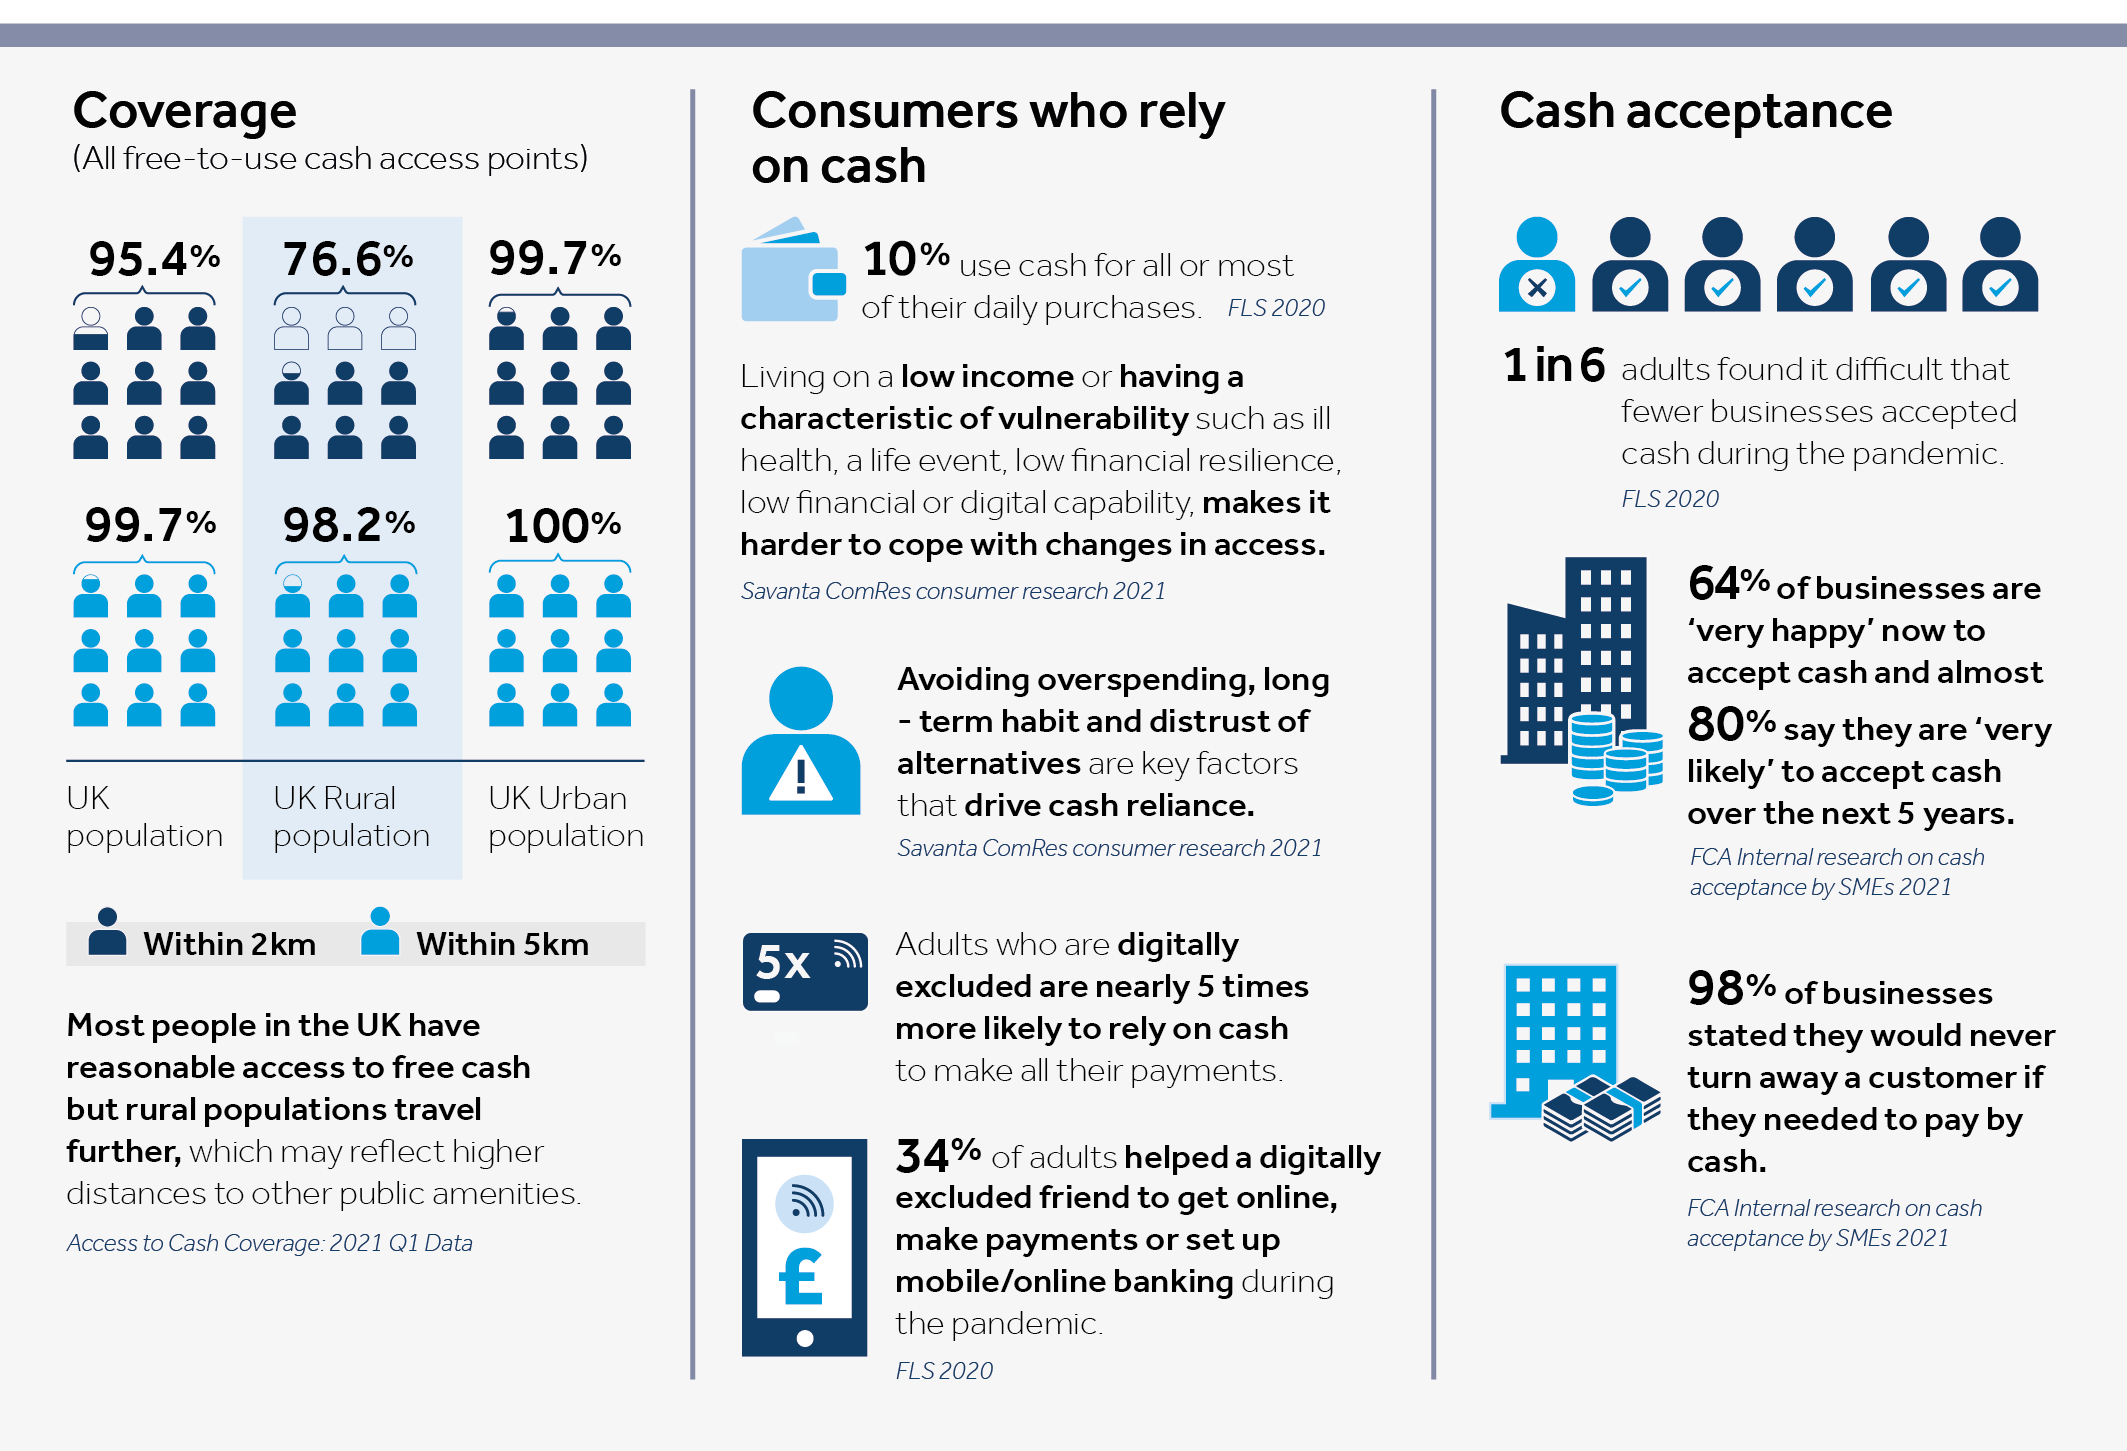 Access to cash and banking services remain vital for many consumers and businesses